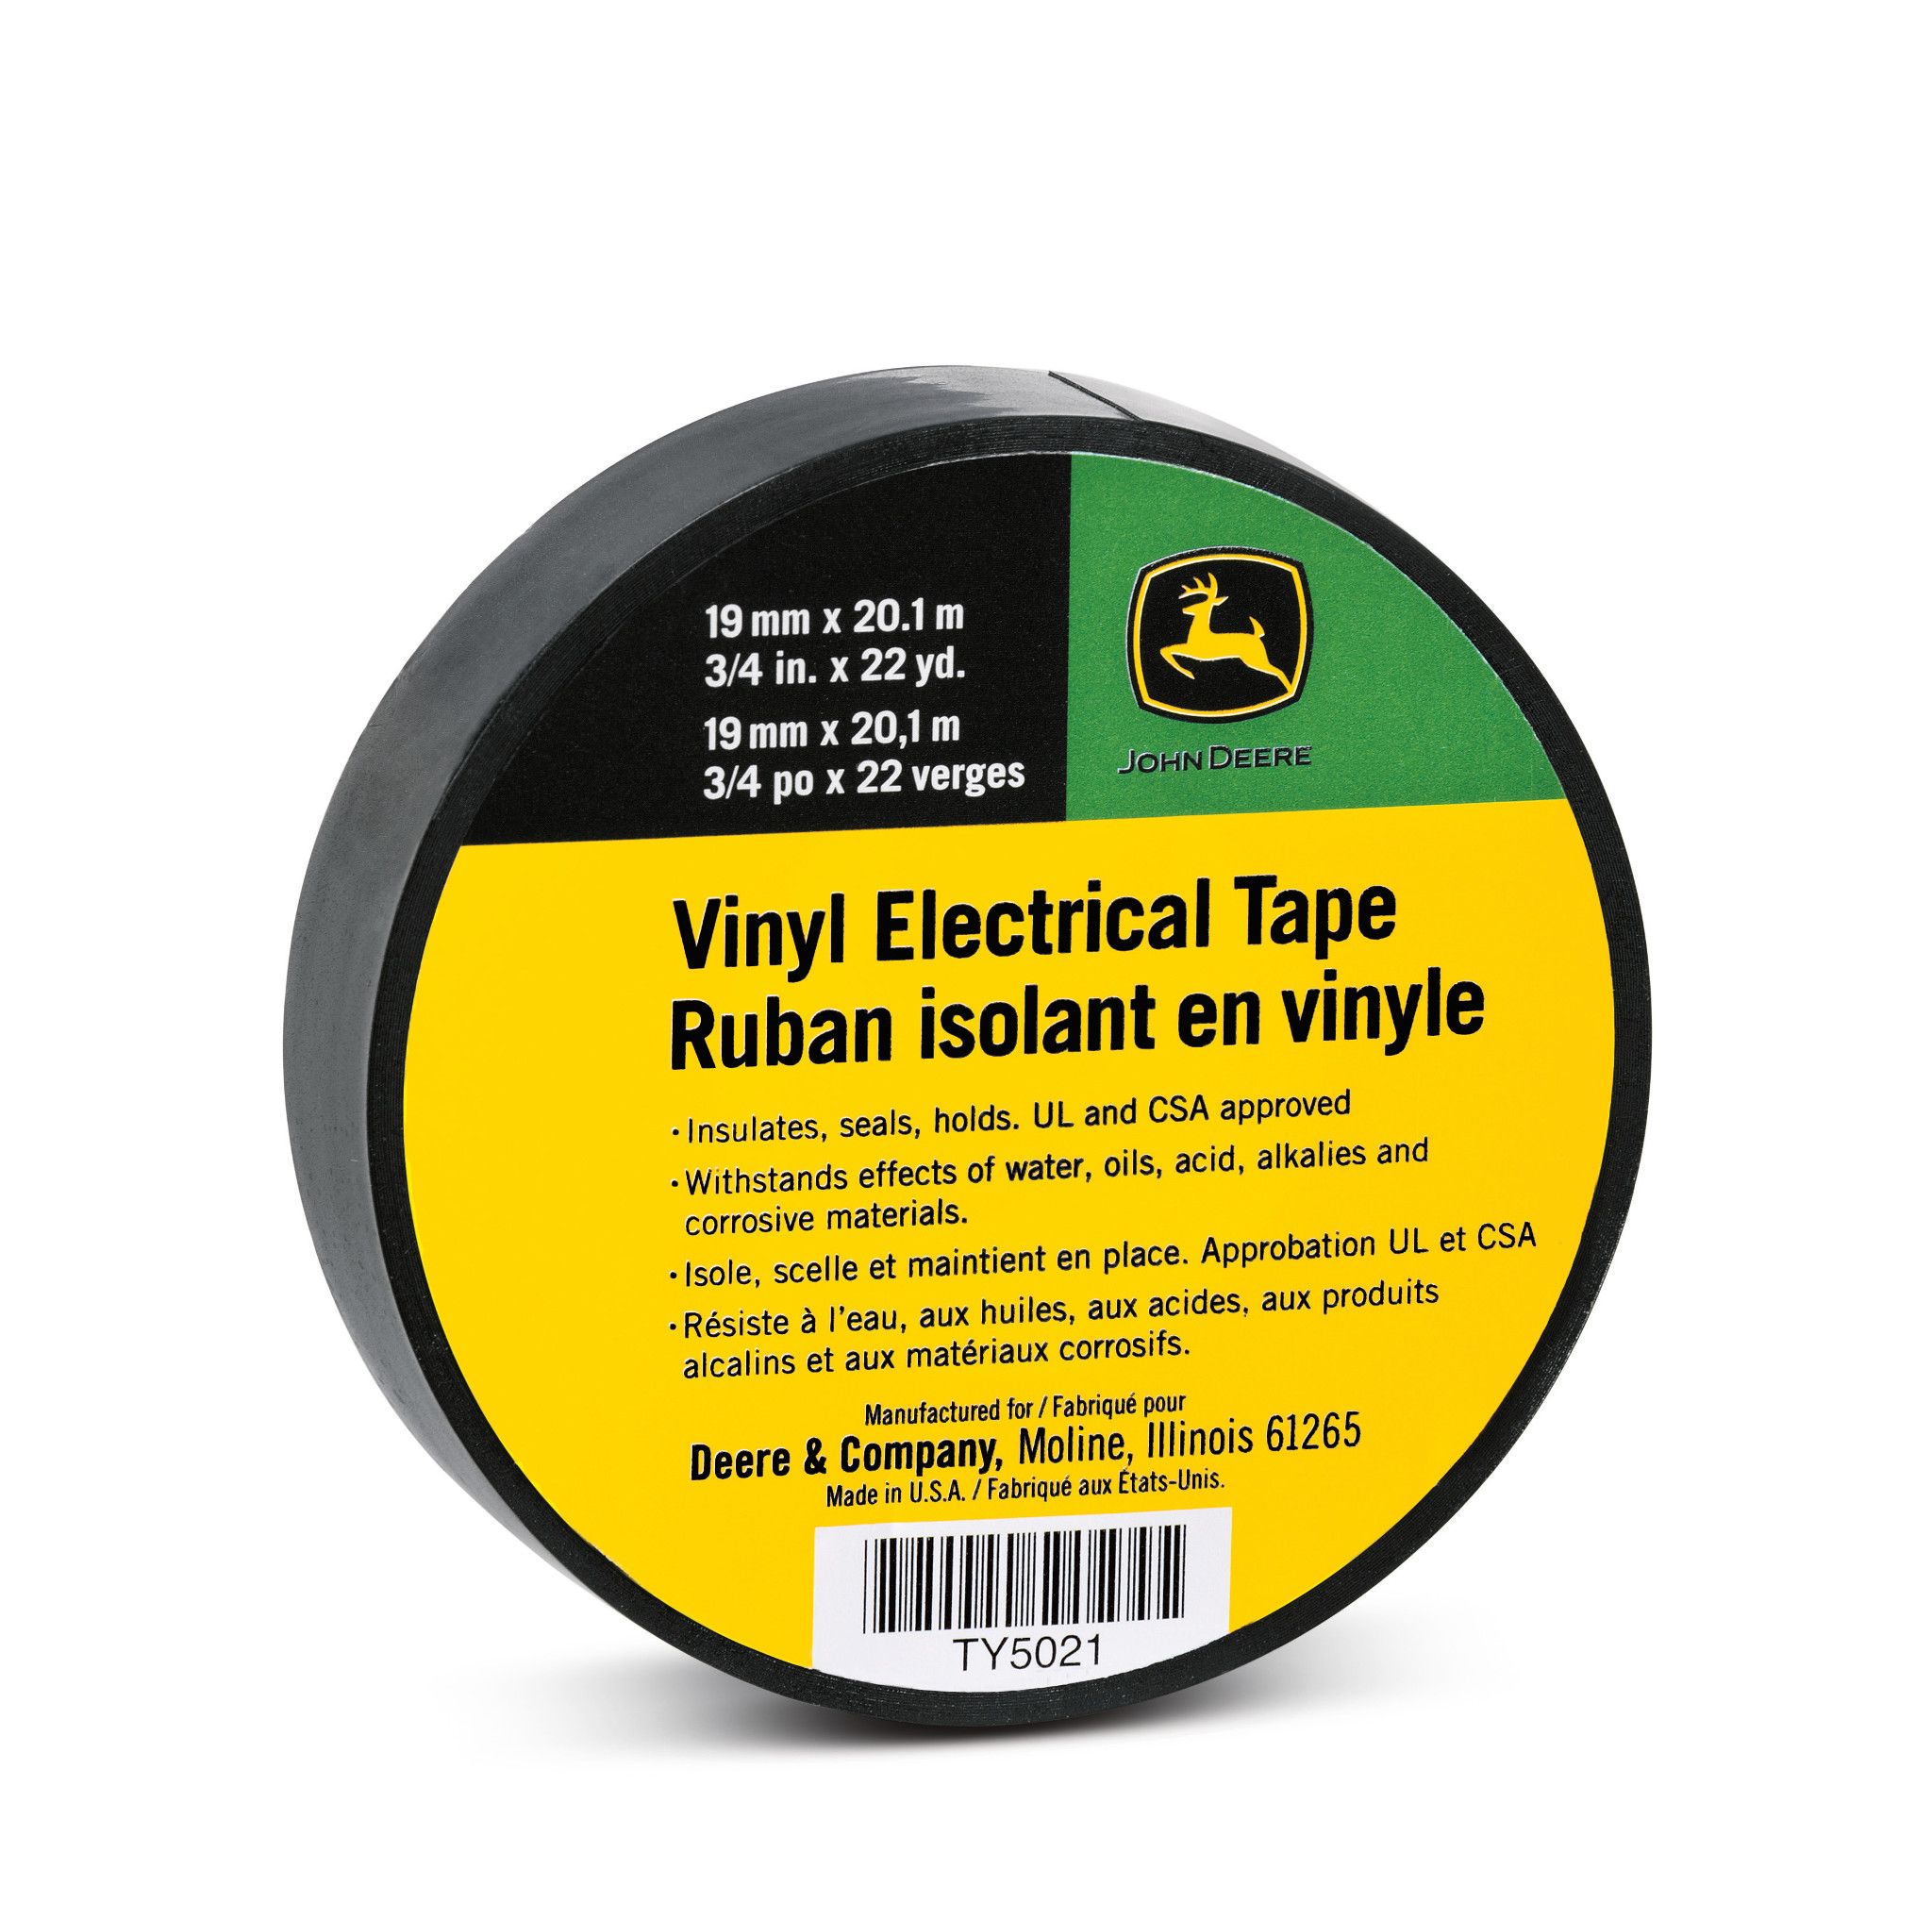 Vinyl Electrical Tape - TY5021